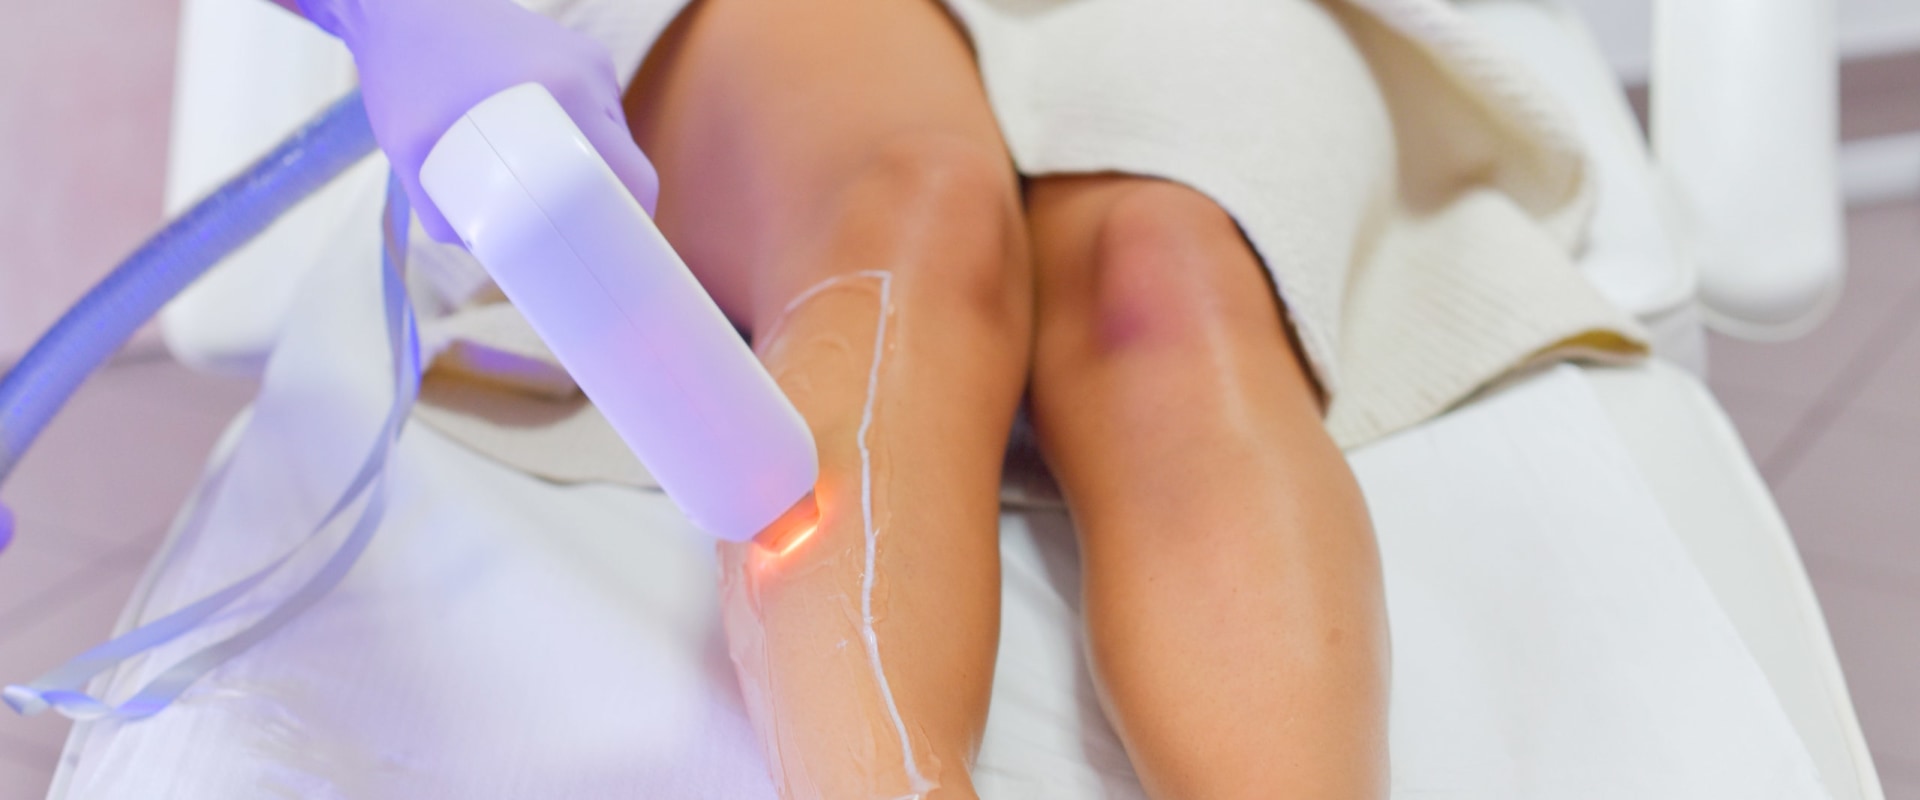 How Long Does Laser Hair Removal Last? Expert Advice on Lasting Results